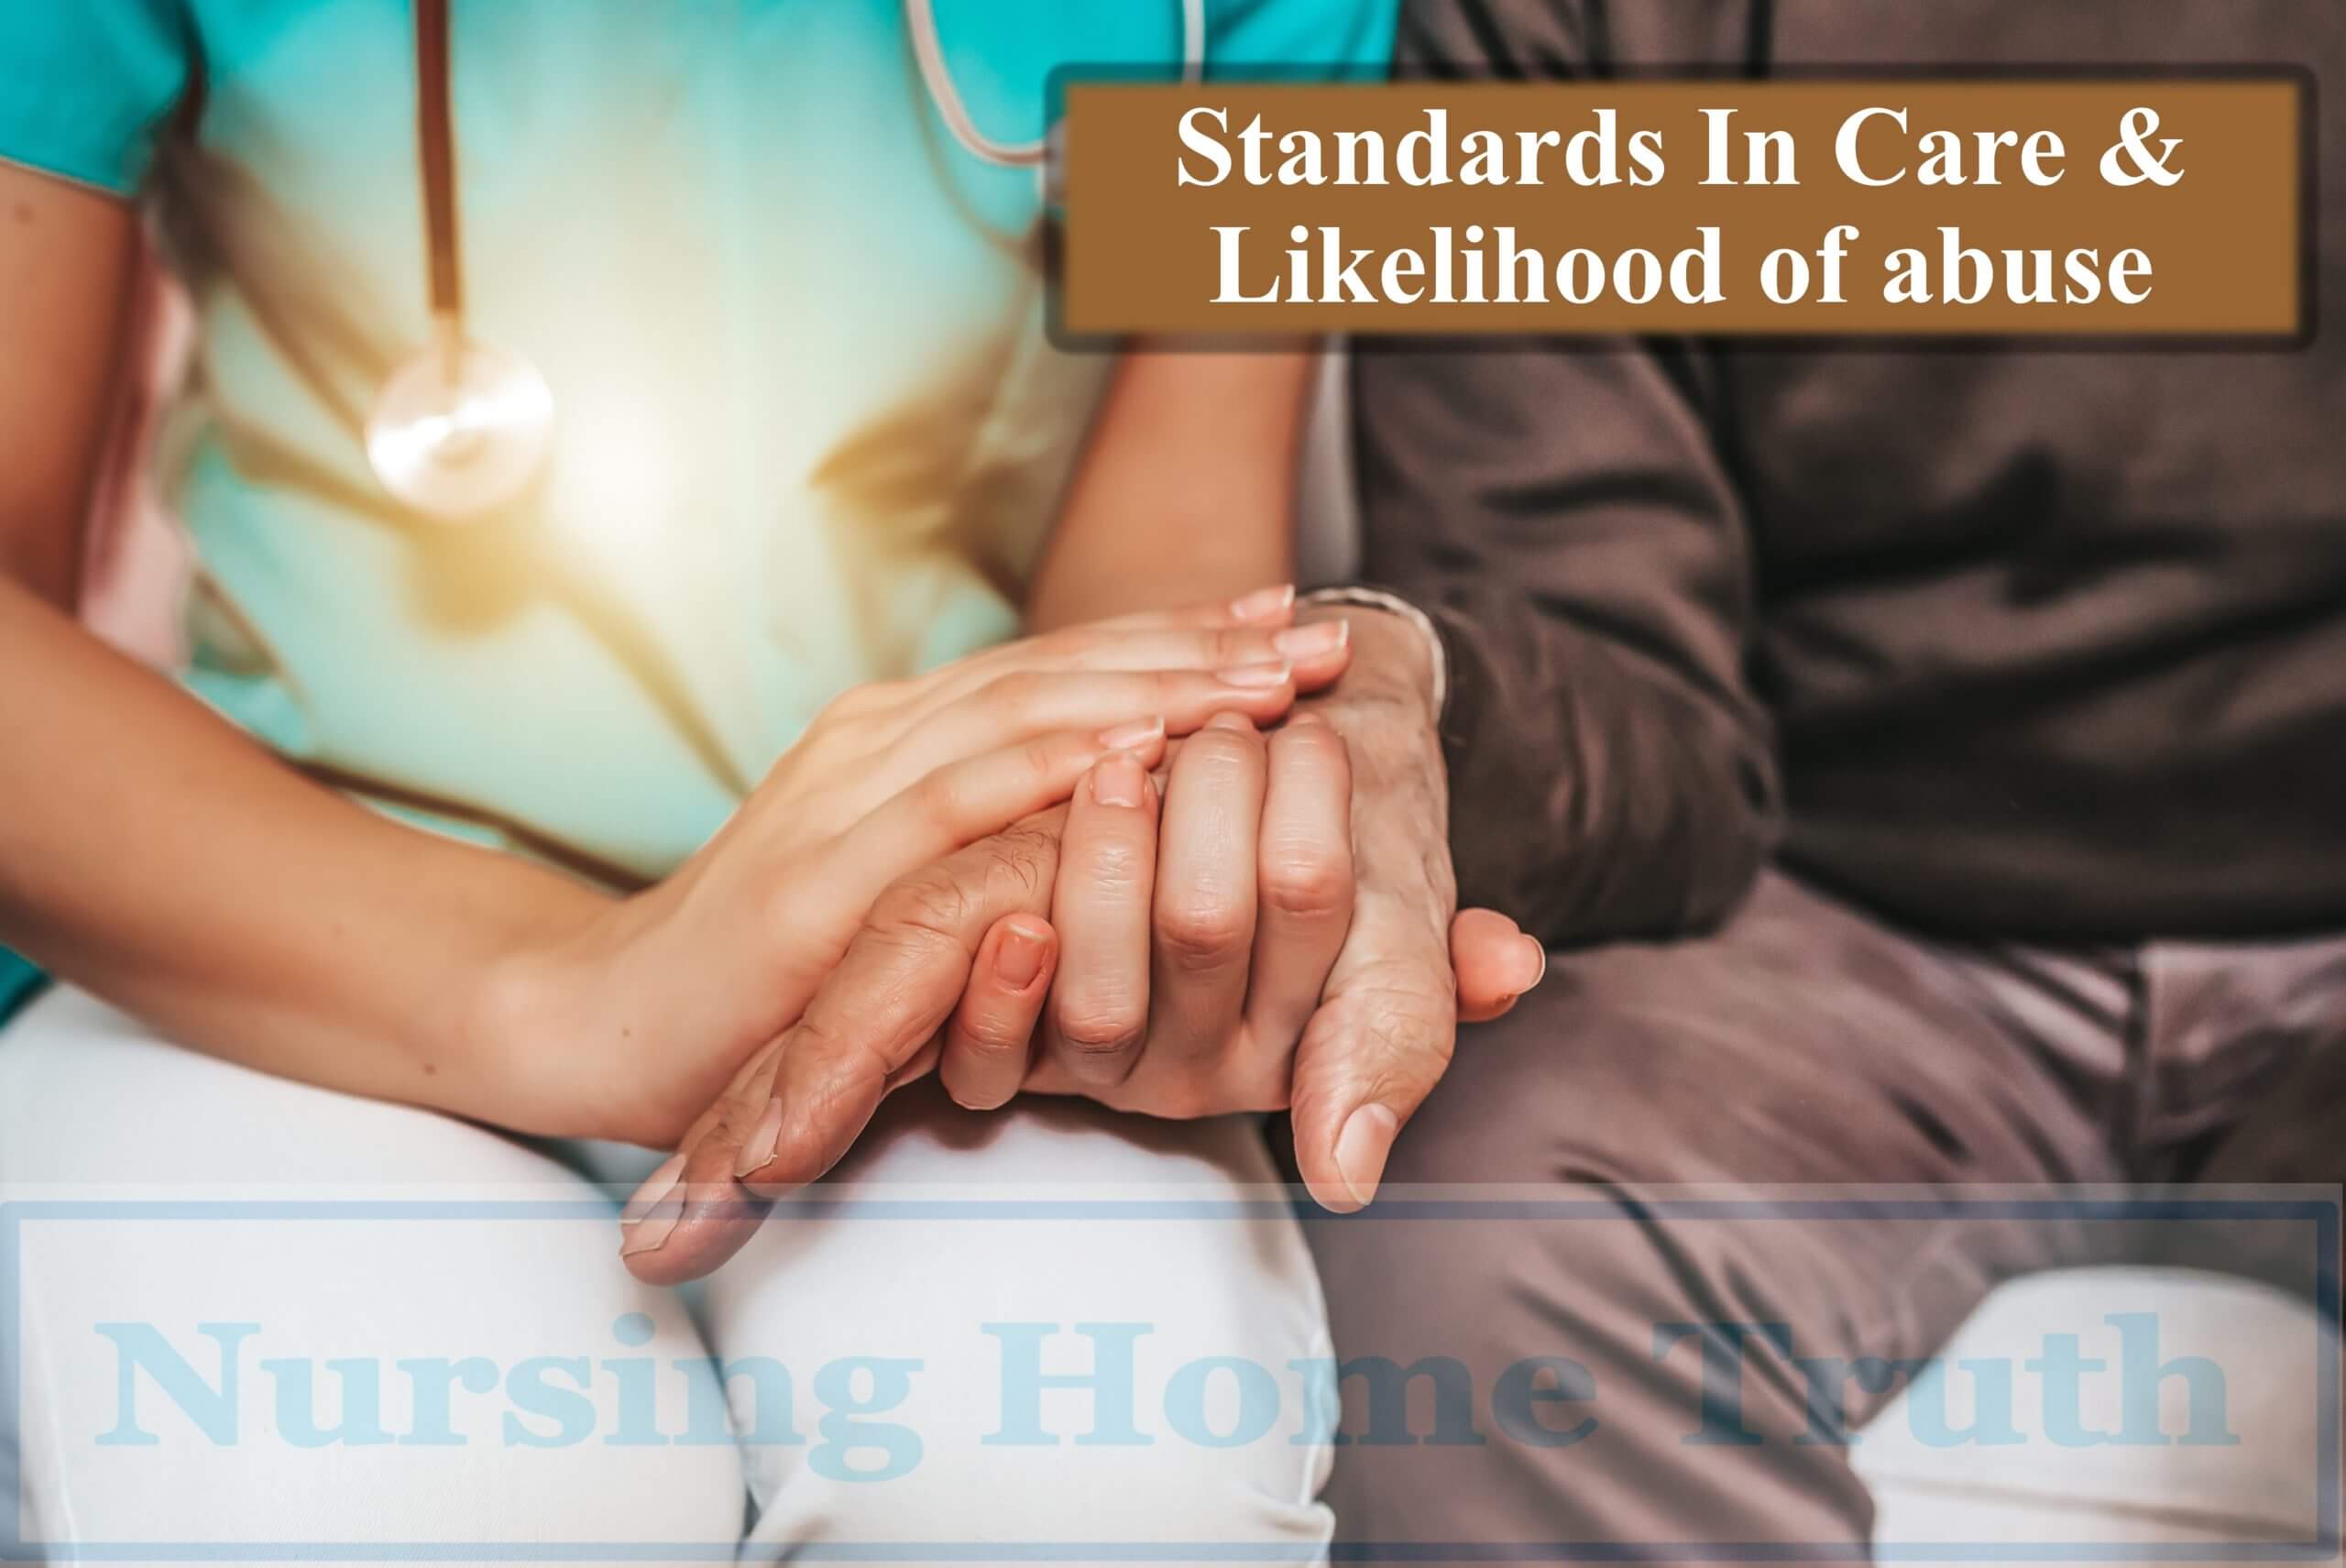 Likelihood of Abuse is Explained by Standards in Care